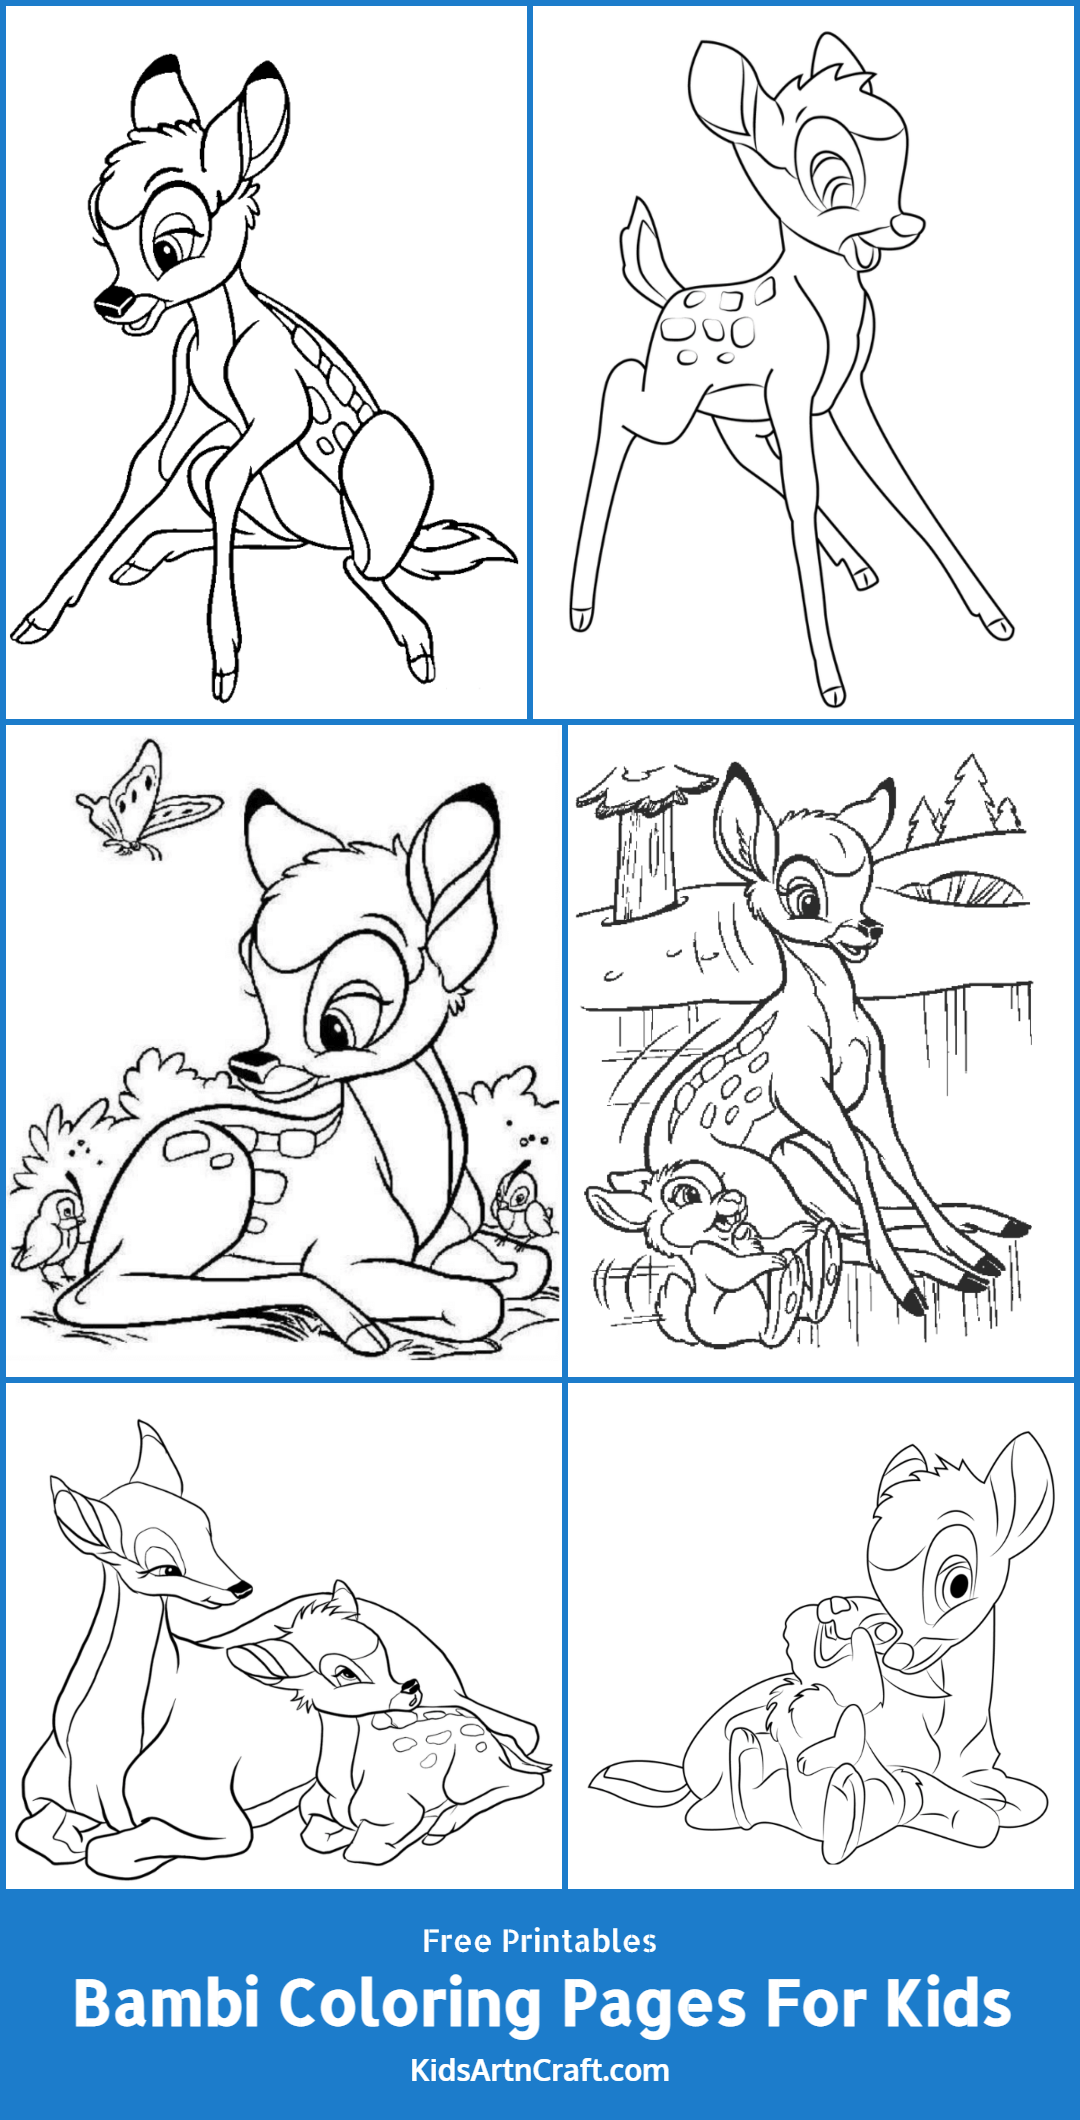 Bambi Coloring Pages For Kids – Free Printables